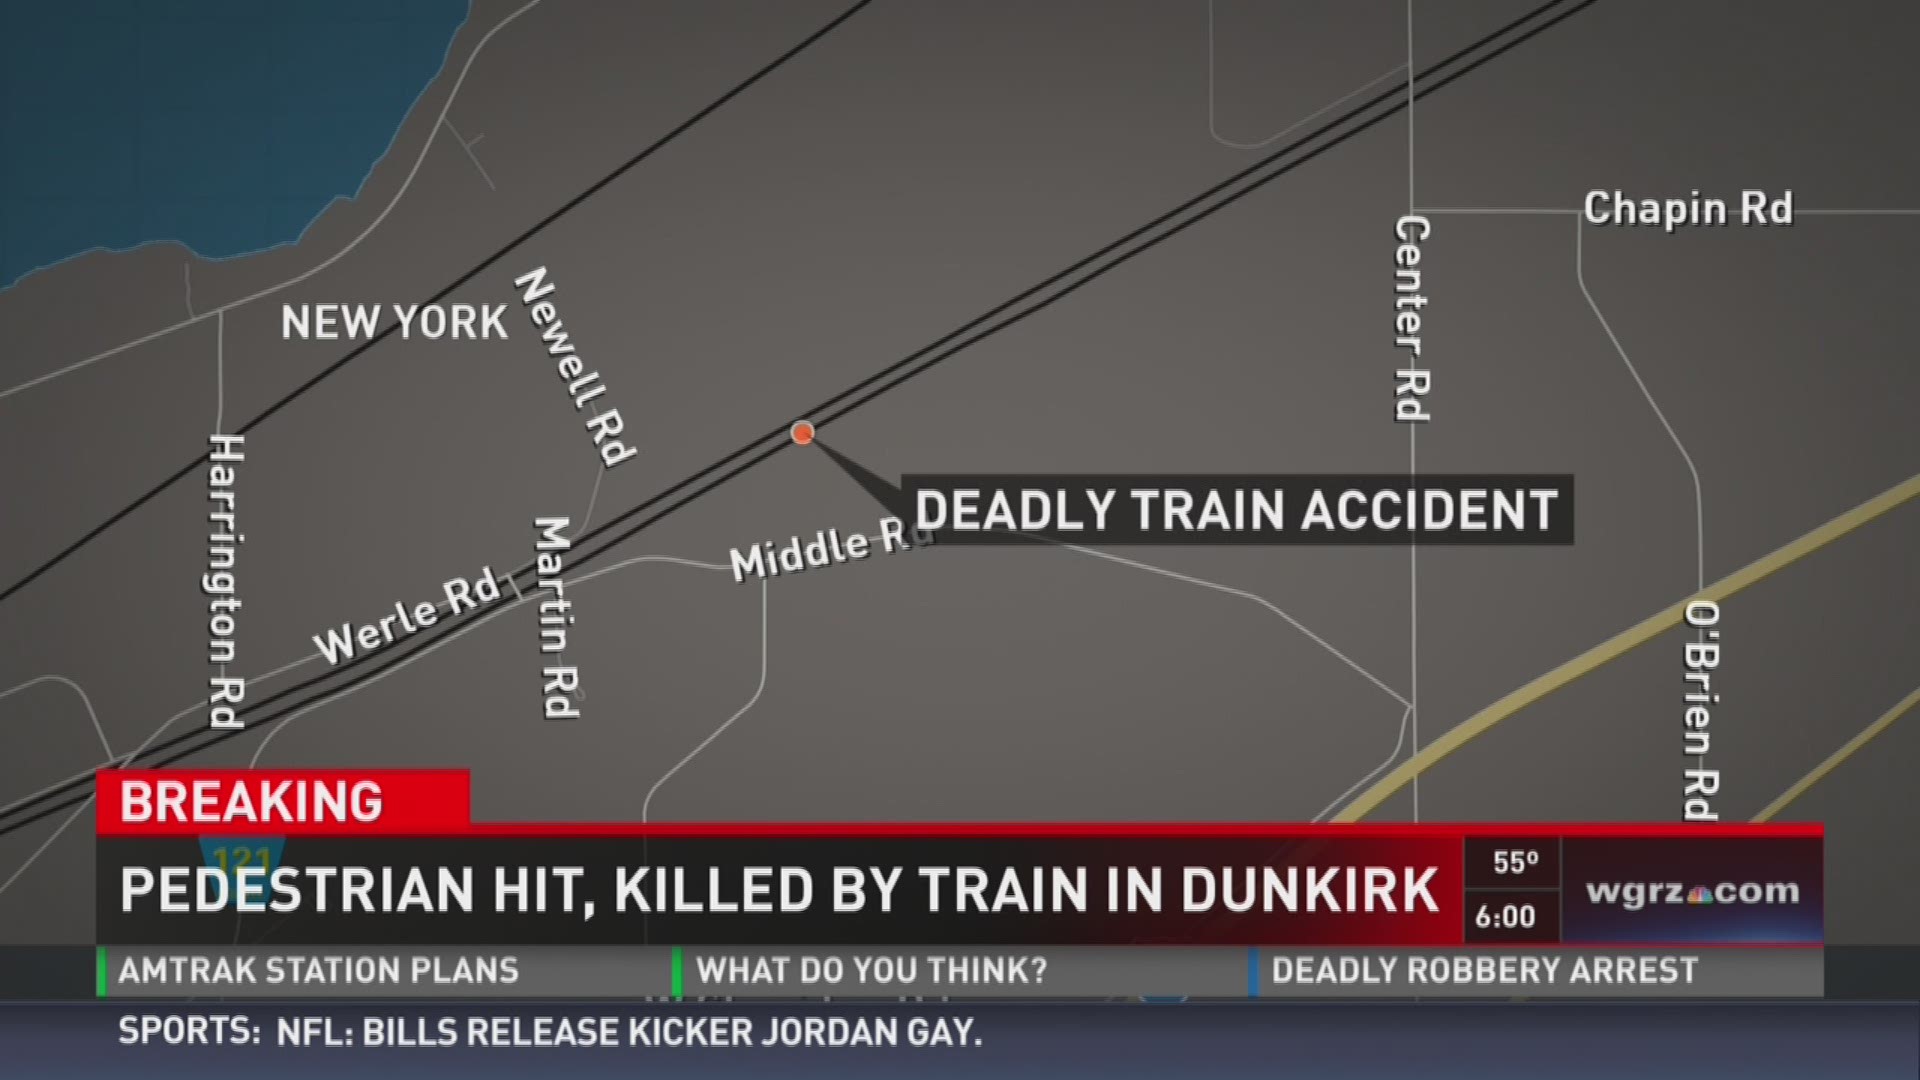 City of Dunkirk Police are investigating after they say a pedestrian was struck and killed by a train on the CSX Rail Line near Middle Road around 12:04 Wednesday morning.